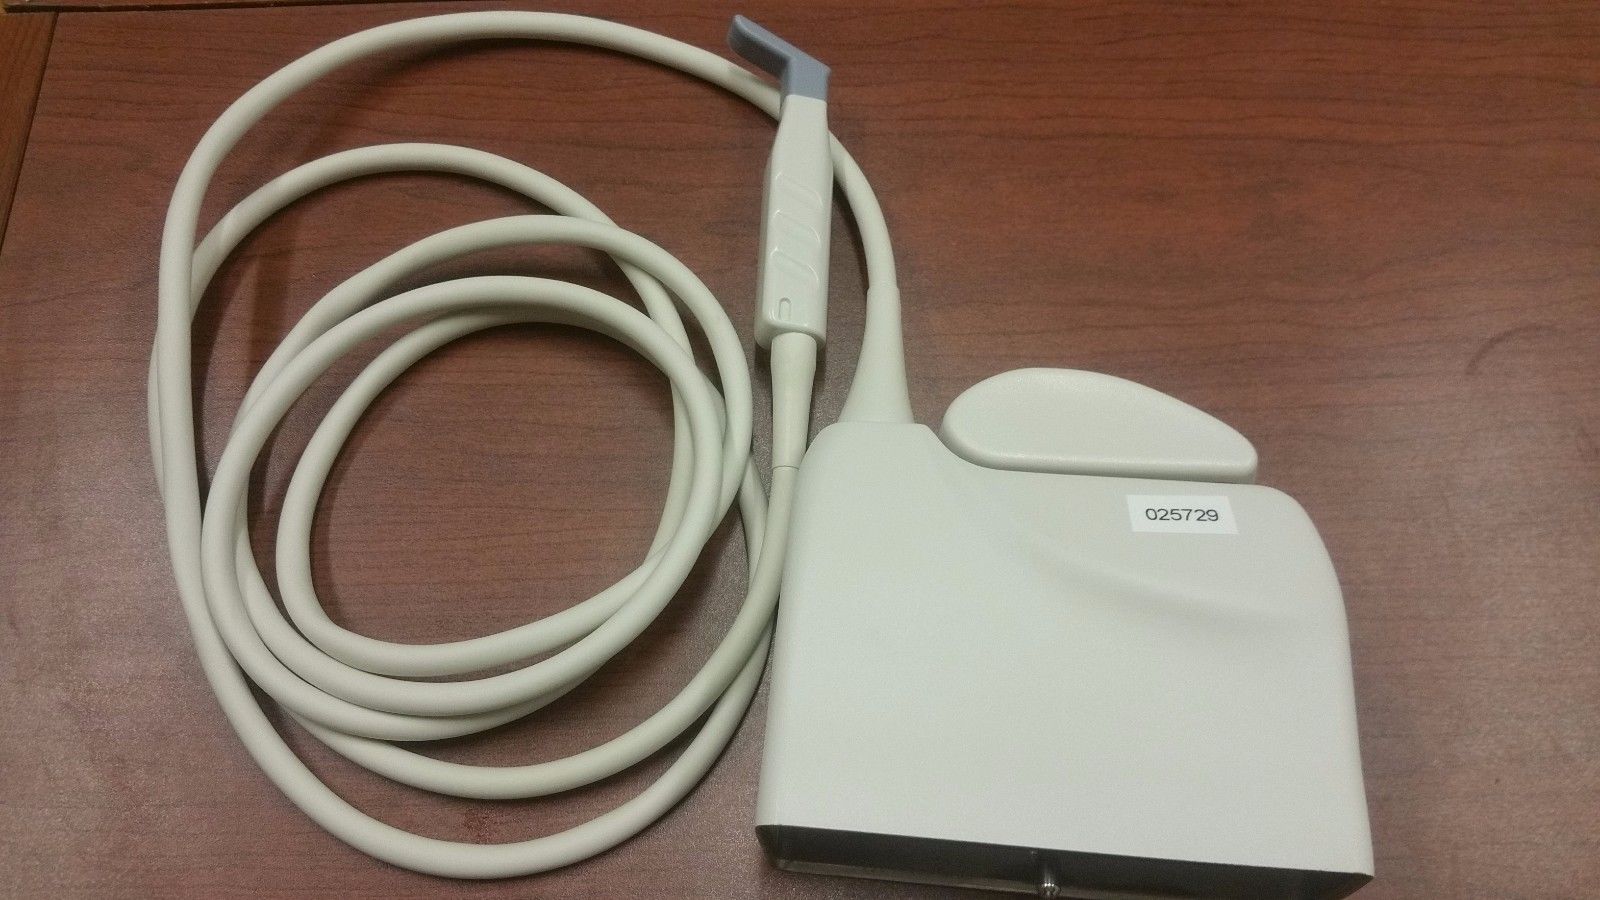 a white device with a cord attached to it